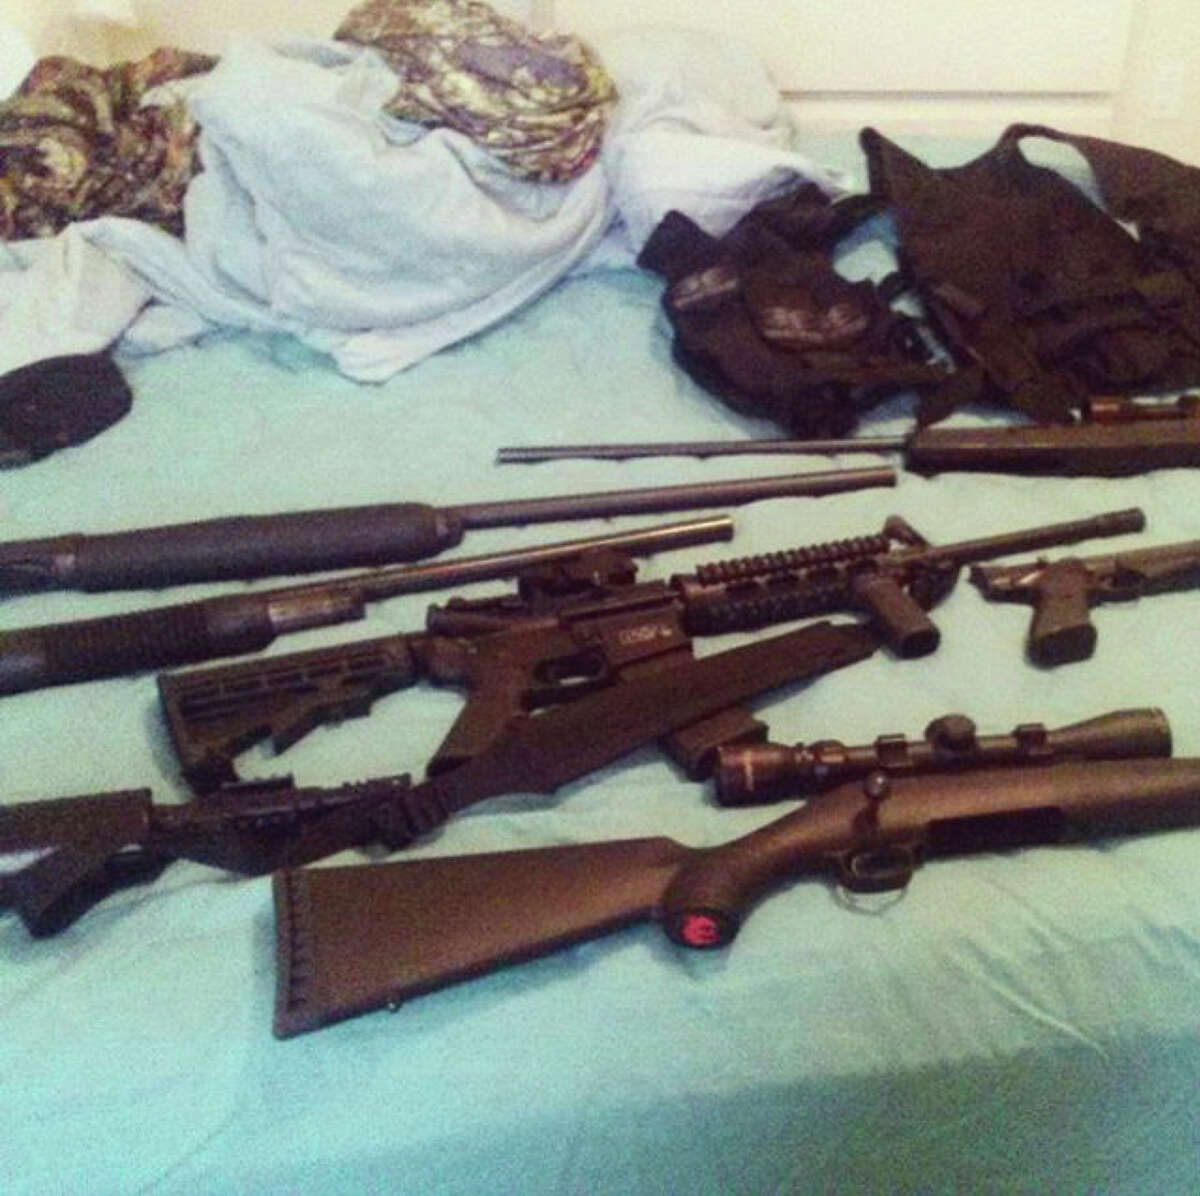 This photo posted on the Instagram account of Nikolas Cruz shows weapons lying on a bed. Cruz was charged with 17 counts of premeditated murder on Thursday, Feb. 15, 2018, the day after opening fire with a semi-automatic weapon in the Marjory Stoneman Douglas High School in Parkland, Fla.